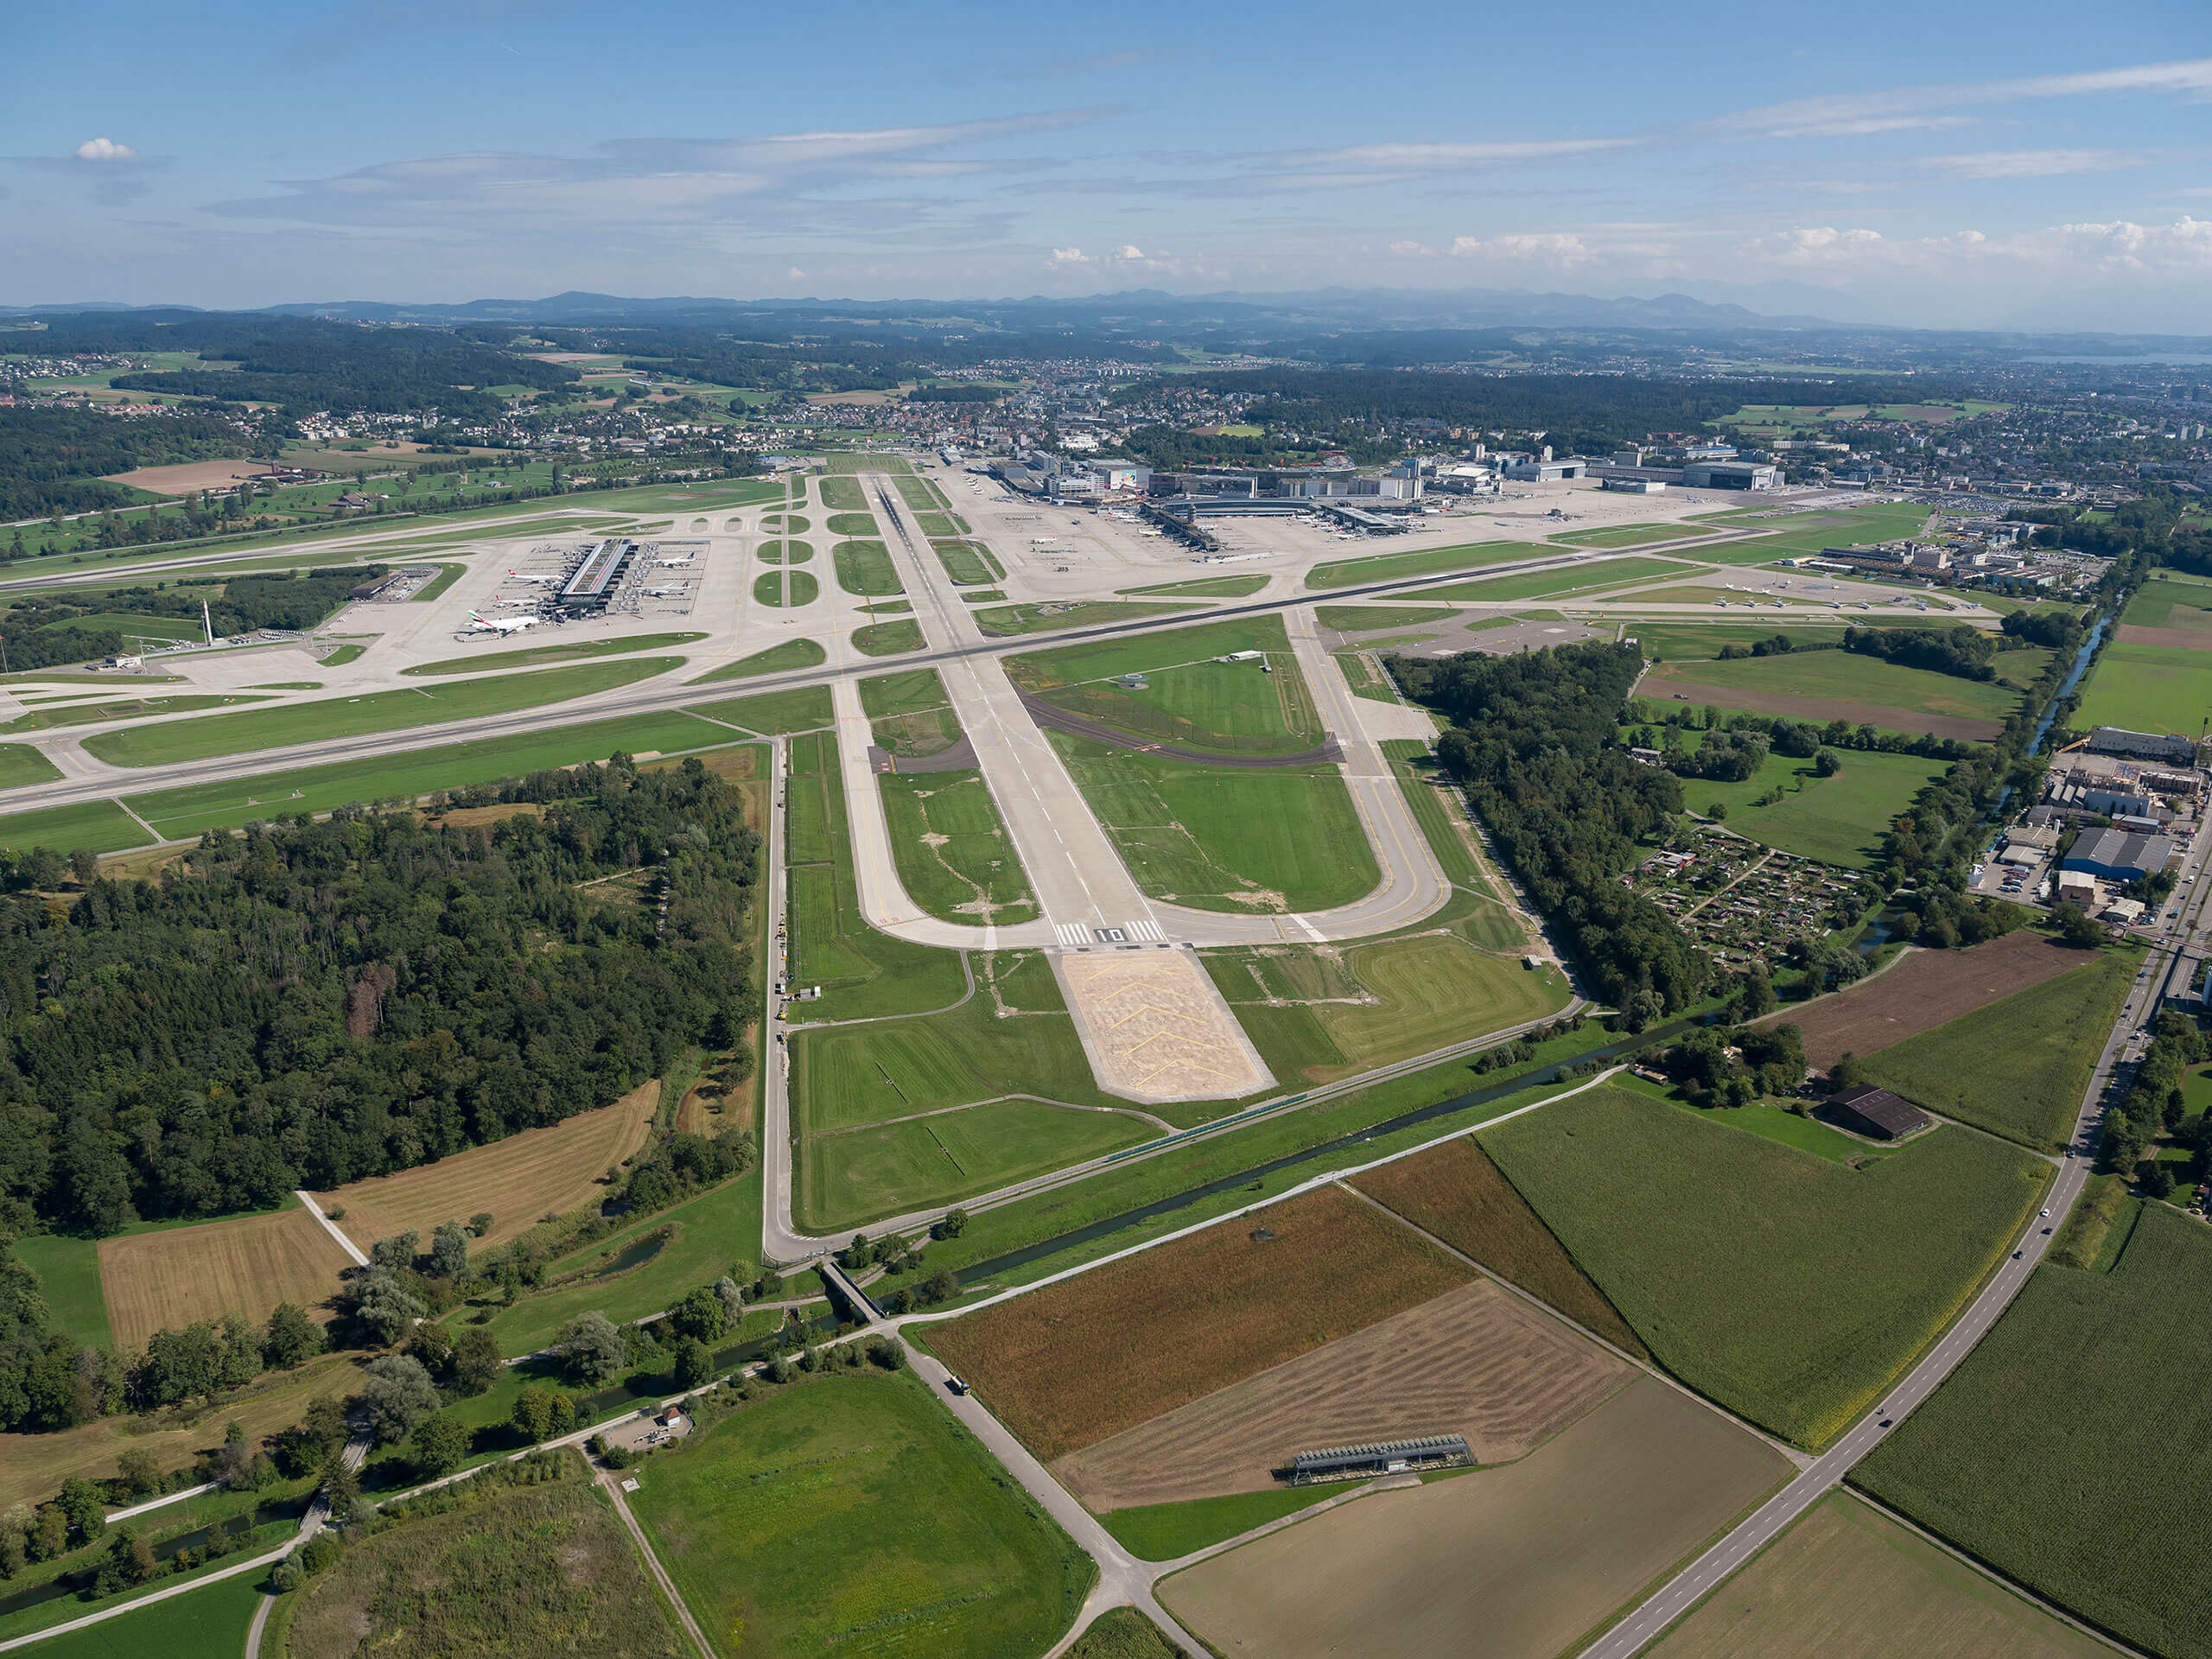 Zurich Airport from above